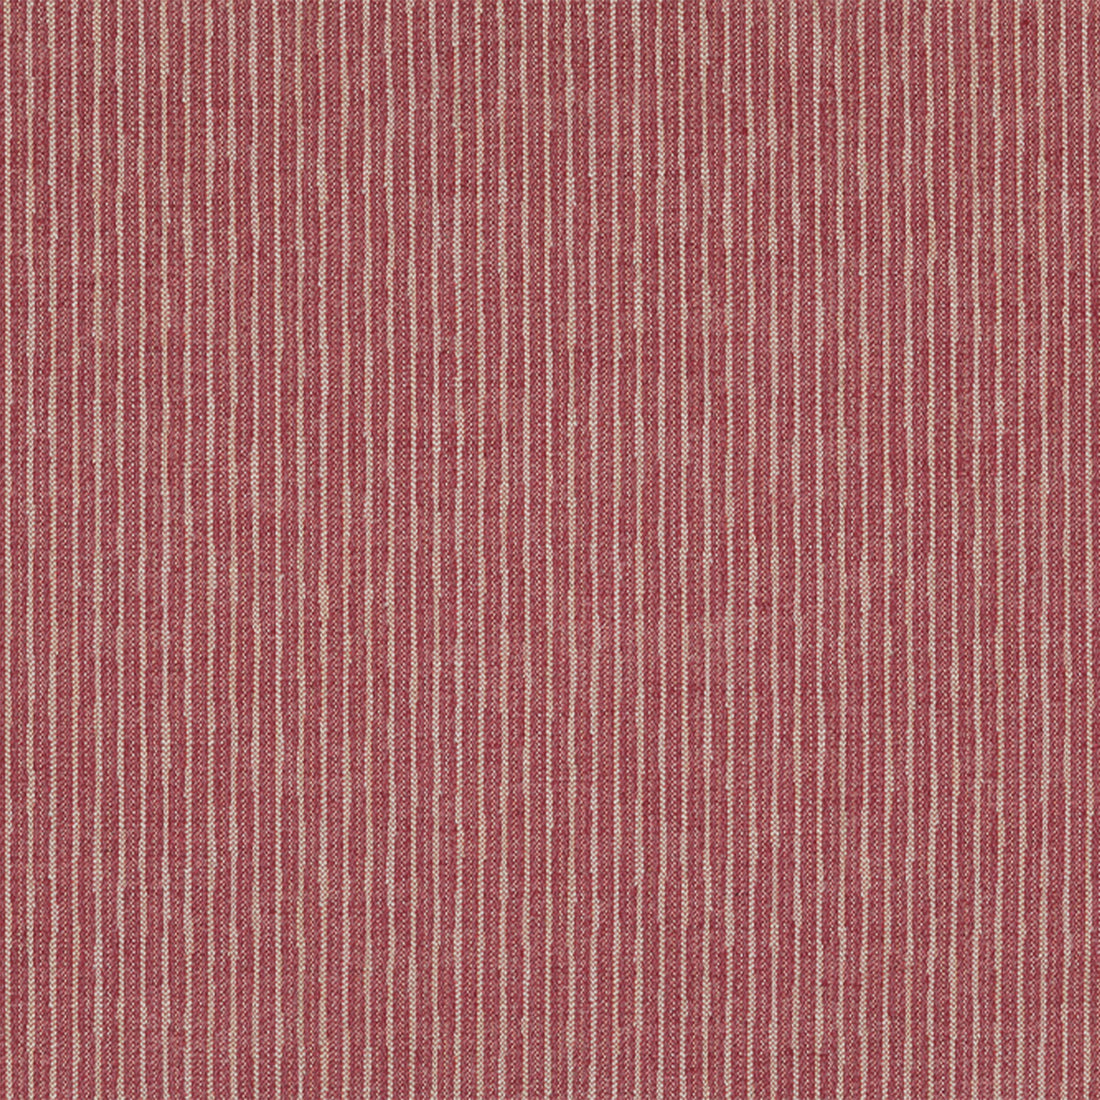 Bailey fabric in raspberry color - pattern BFC-3700.197.0 - by Lee Jofa in the Blithfield collection